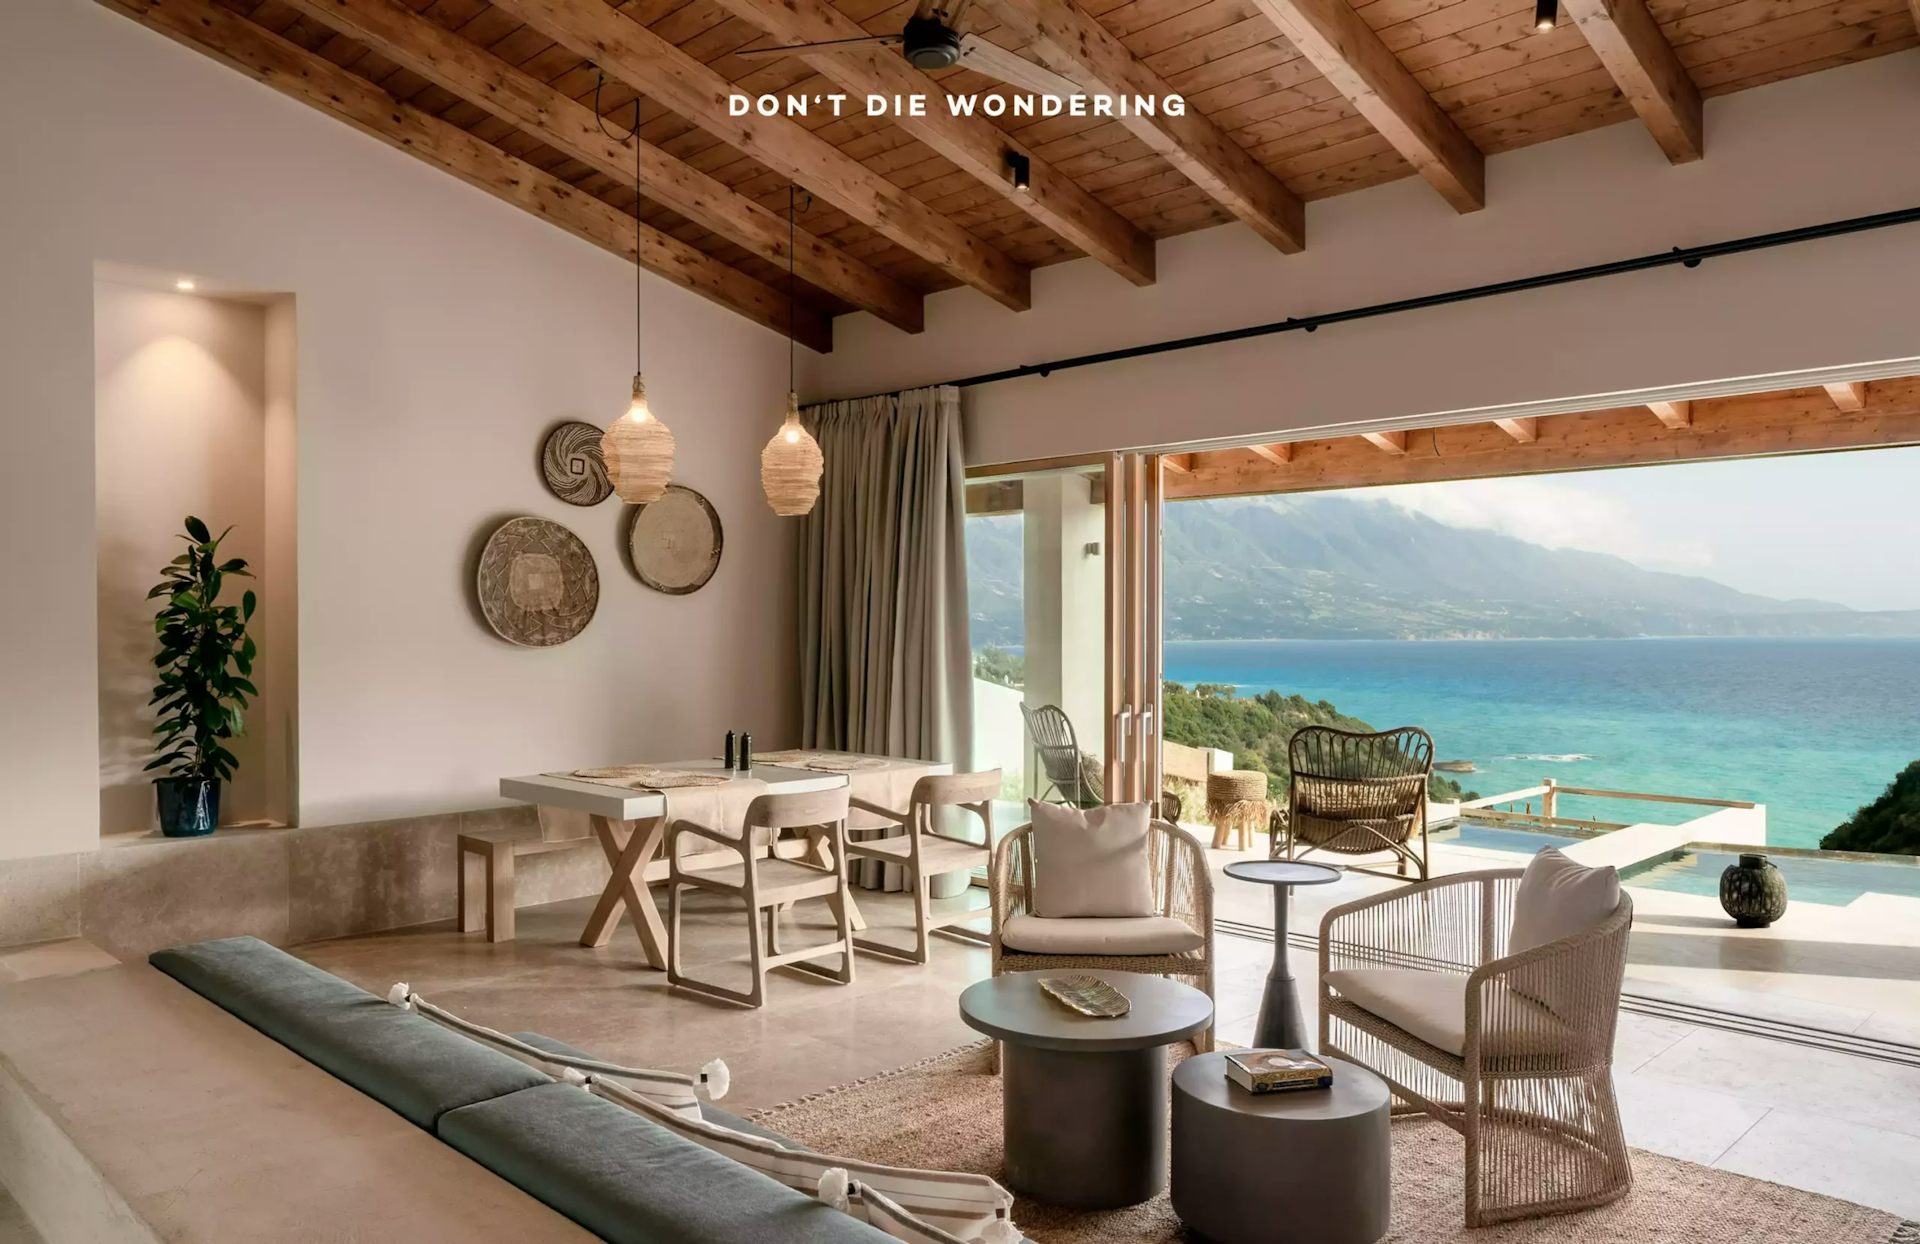 All About the New Eliamos Villas Hotel & Spa in Kefalonia